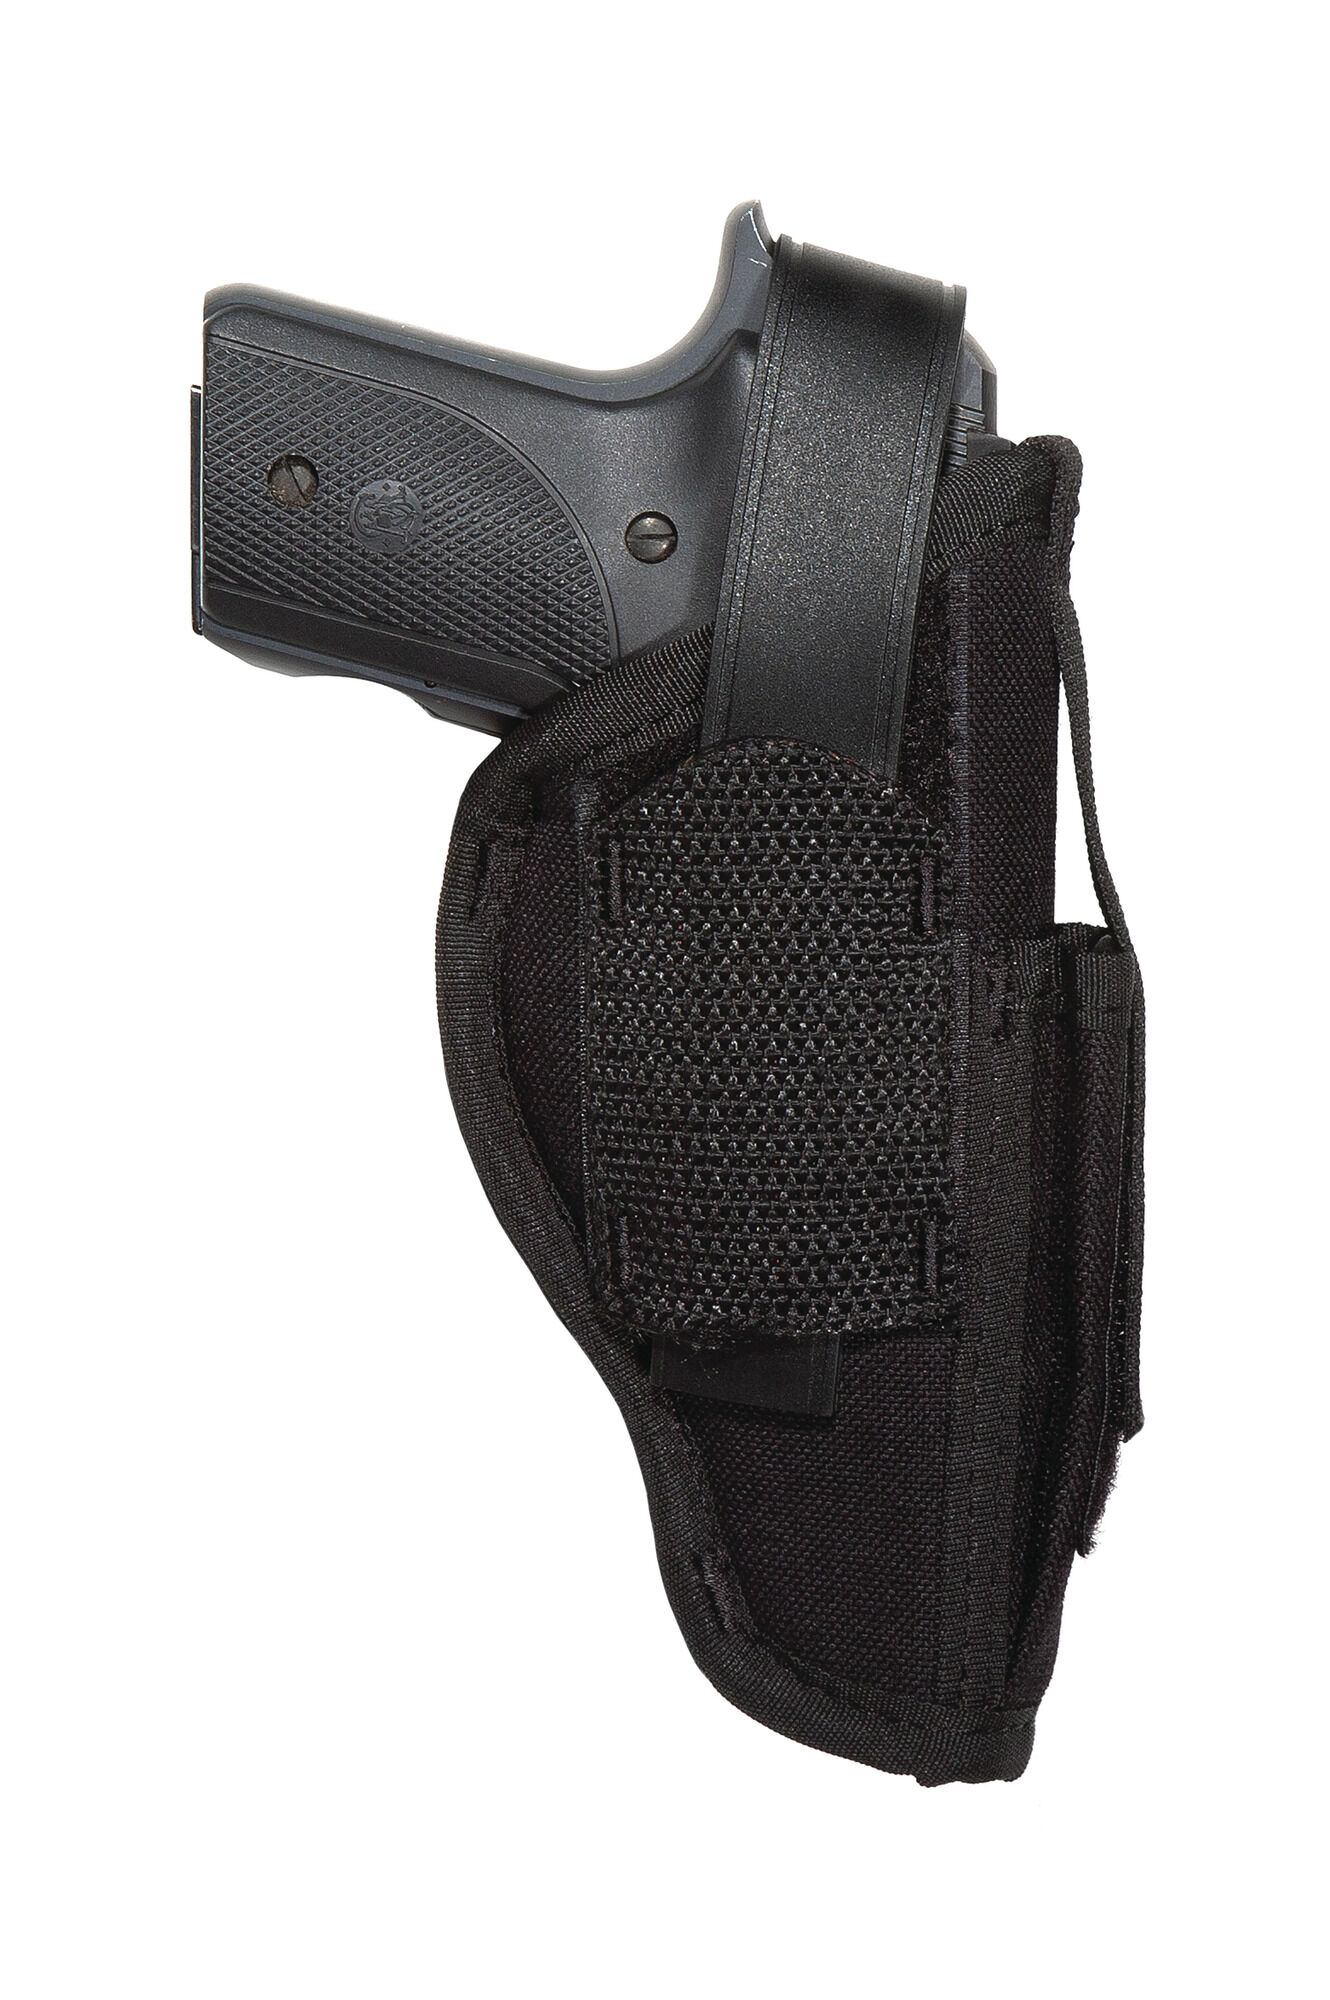 Details about   BRAND NEW UNCLE MIKE'S SIDEKICK AMBIDEXTROUS HIP HOLSTER SIZE 5 BLACK 